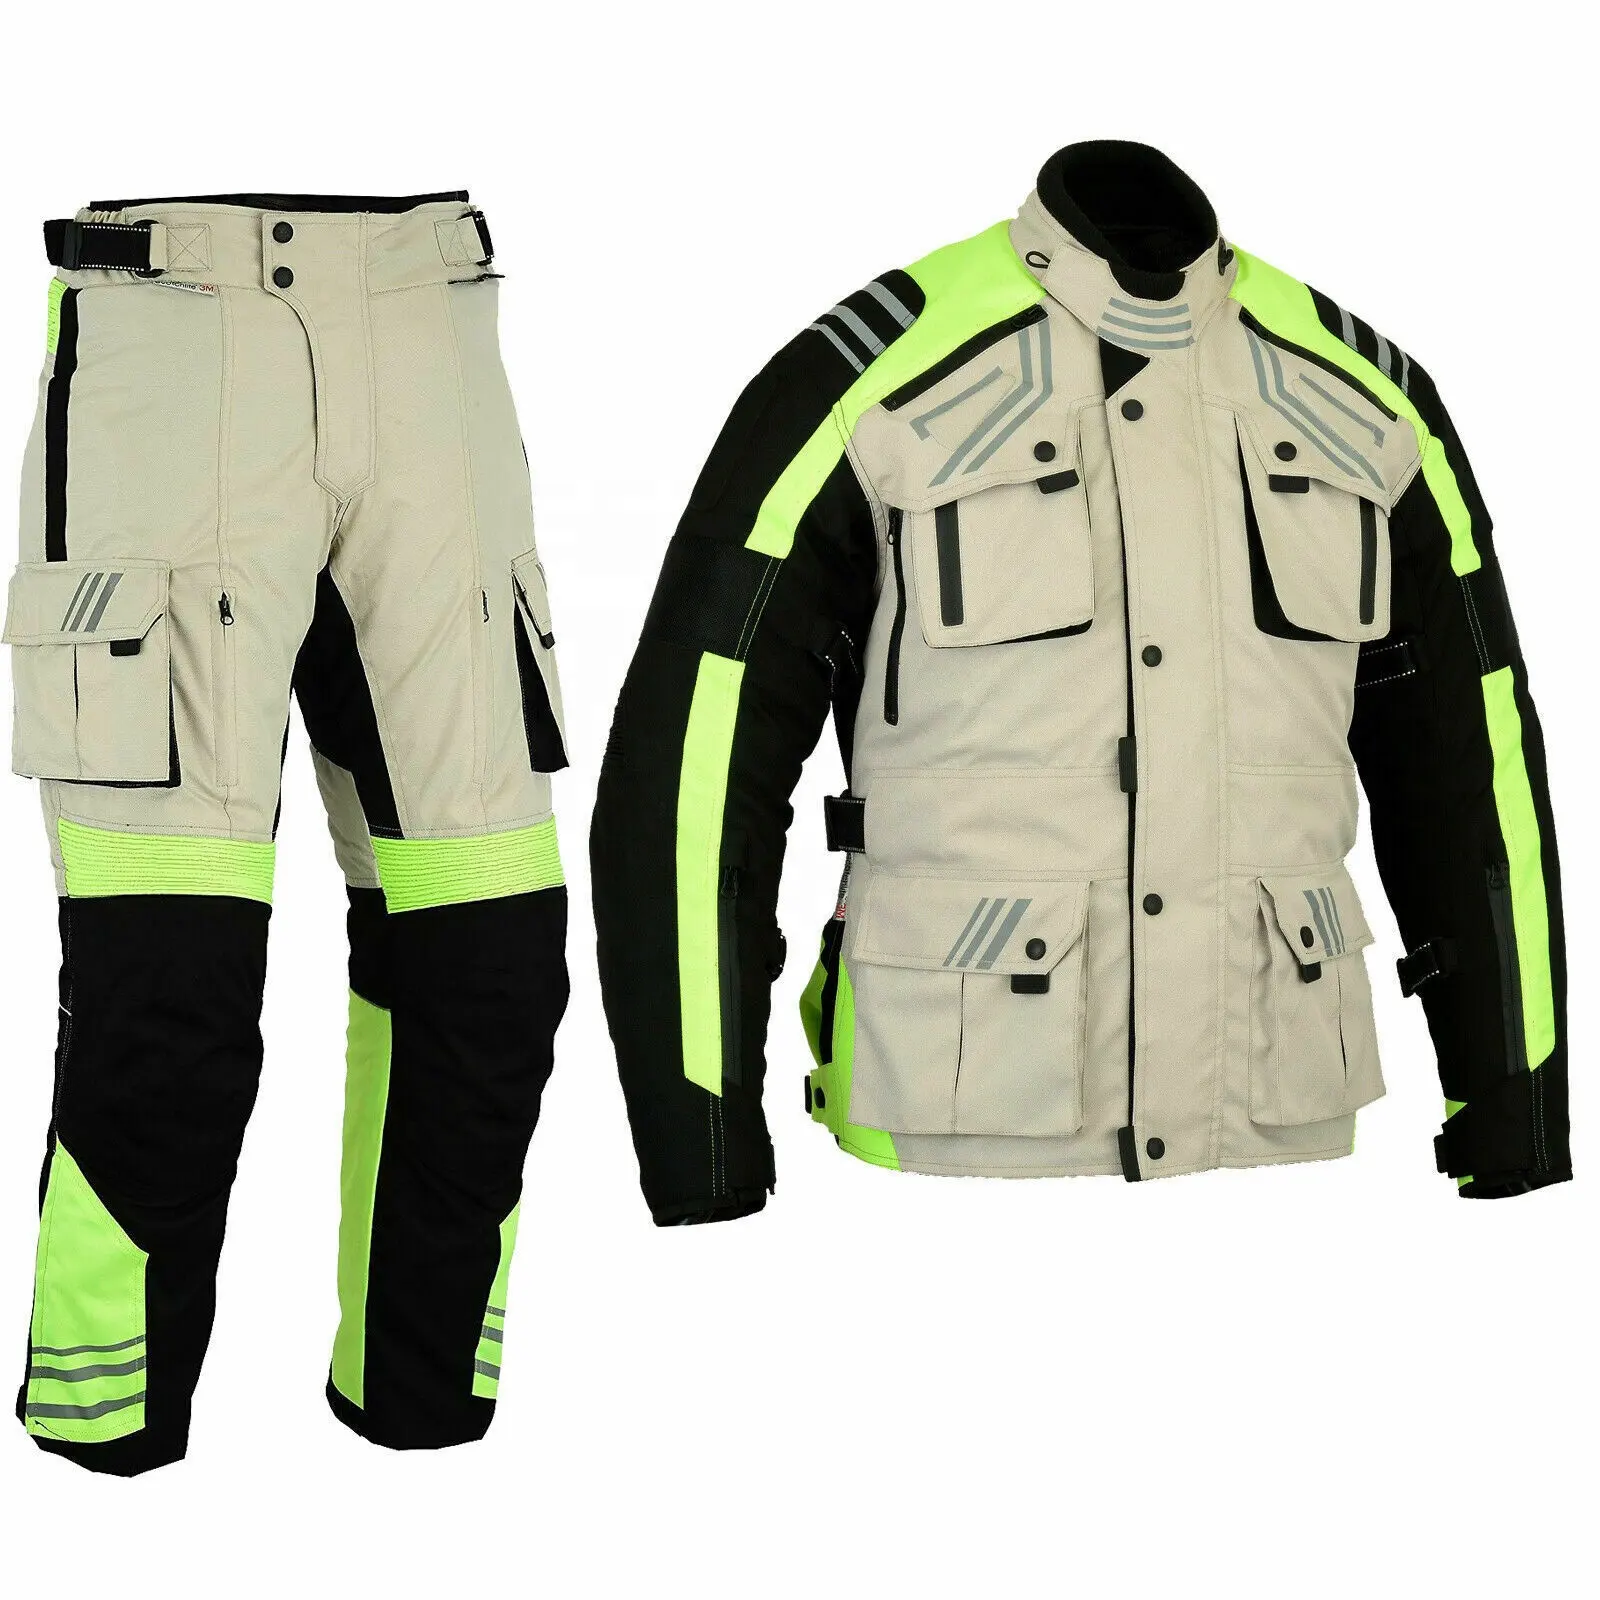 Wholesale New Design 2 Piece Motorcycle Textile Suit, Motorbike Cardura Jacket and Pant, Motorcycle Racing Suit